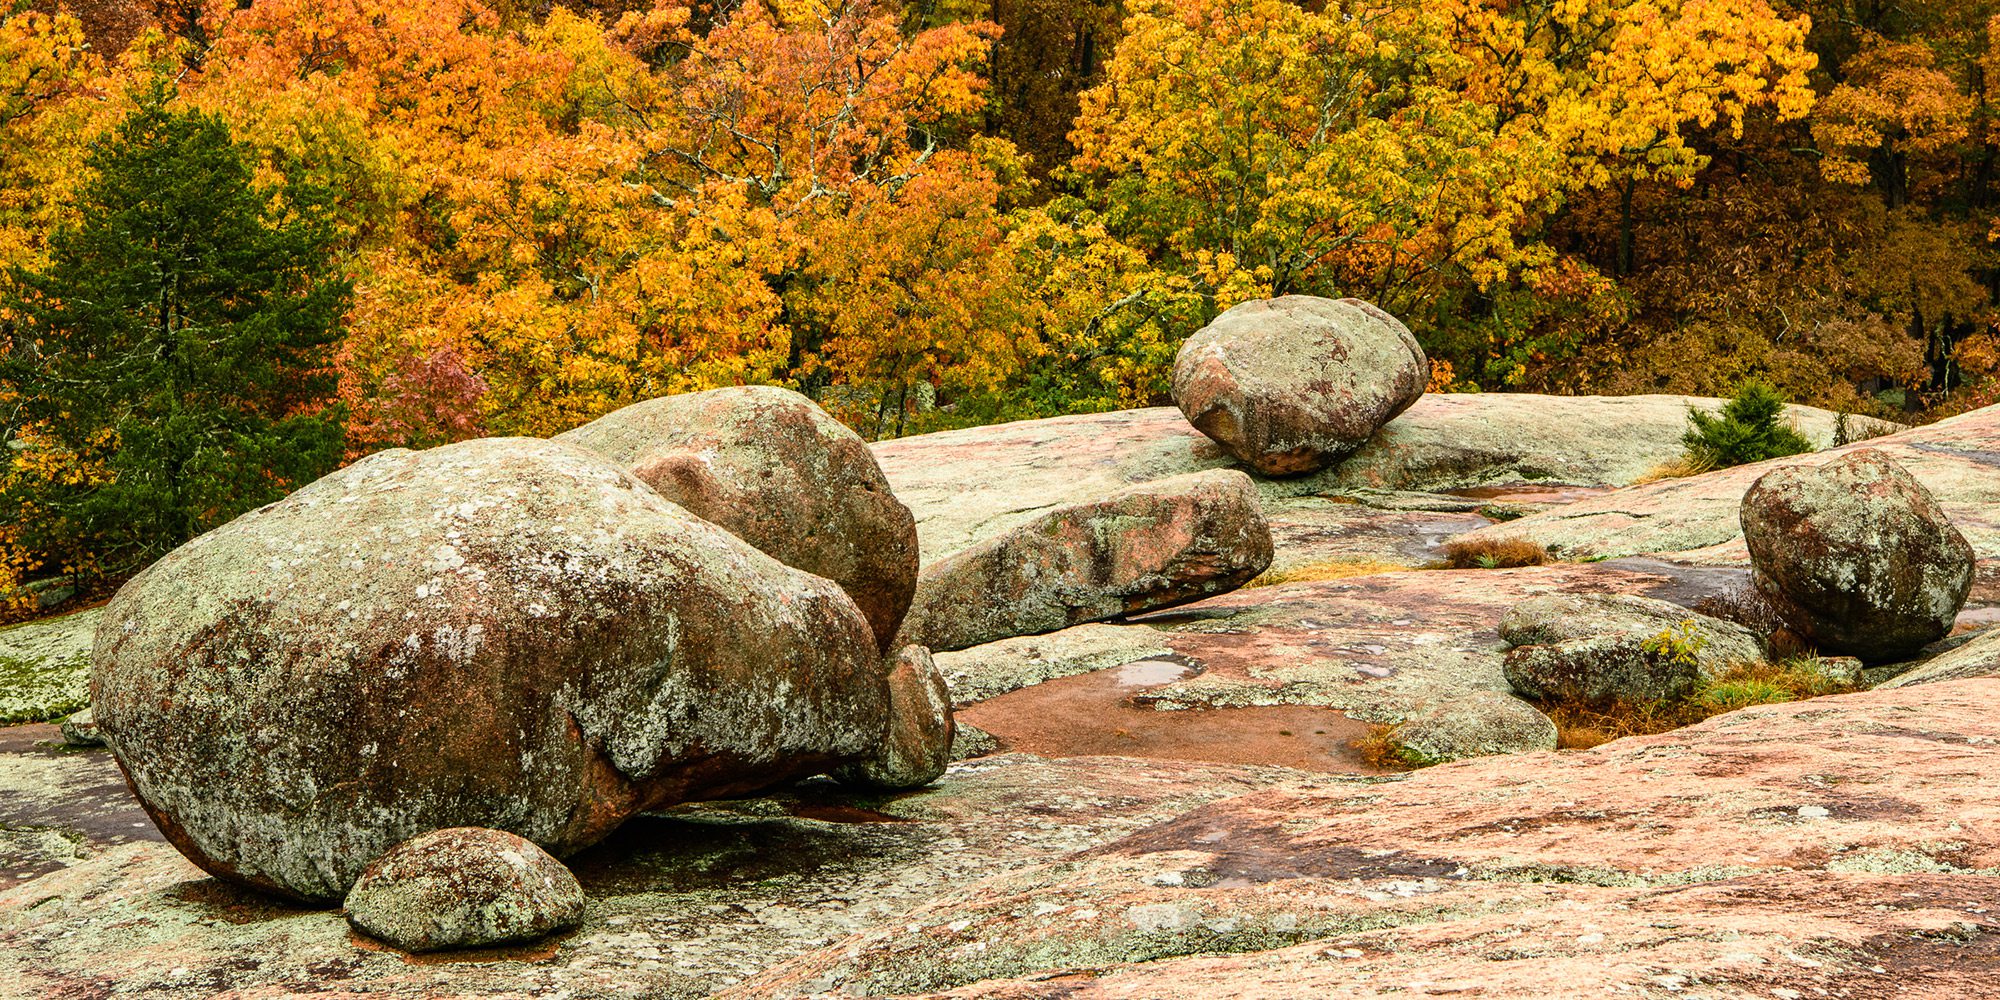 Boulders along the Braille Trail at Elephant Rocks State Park